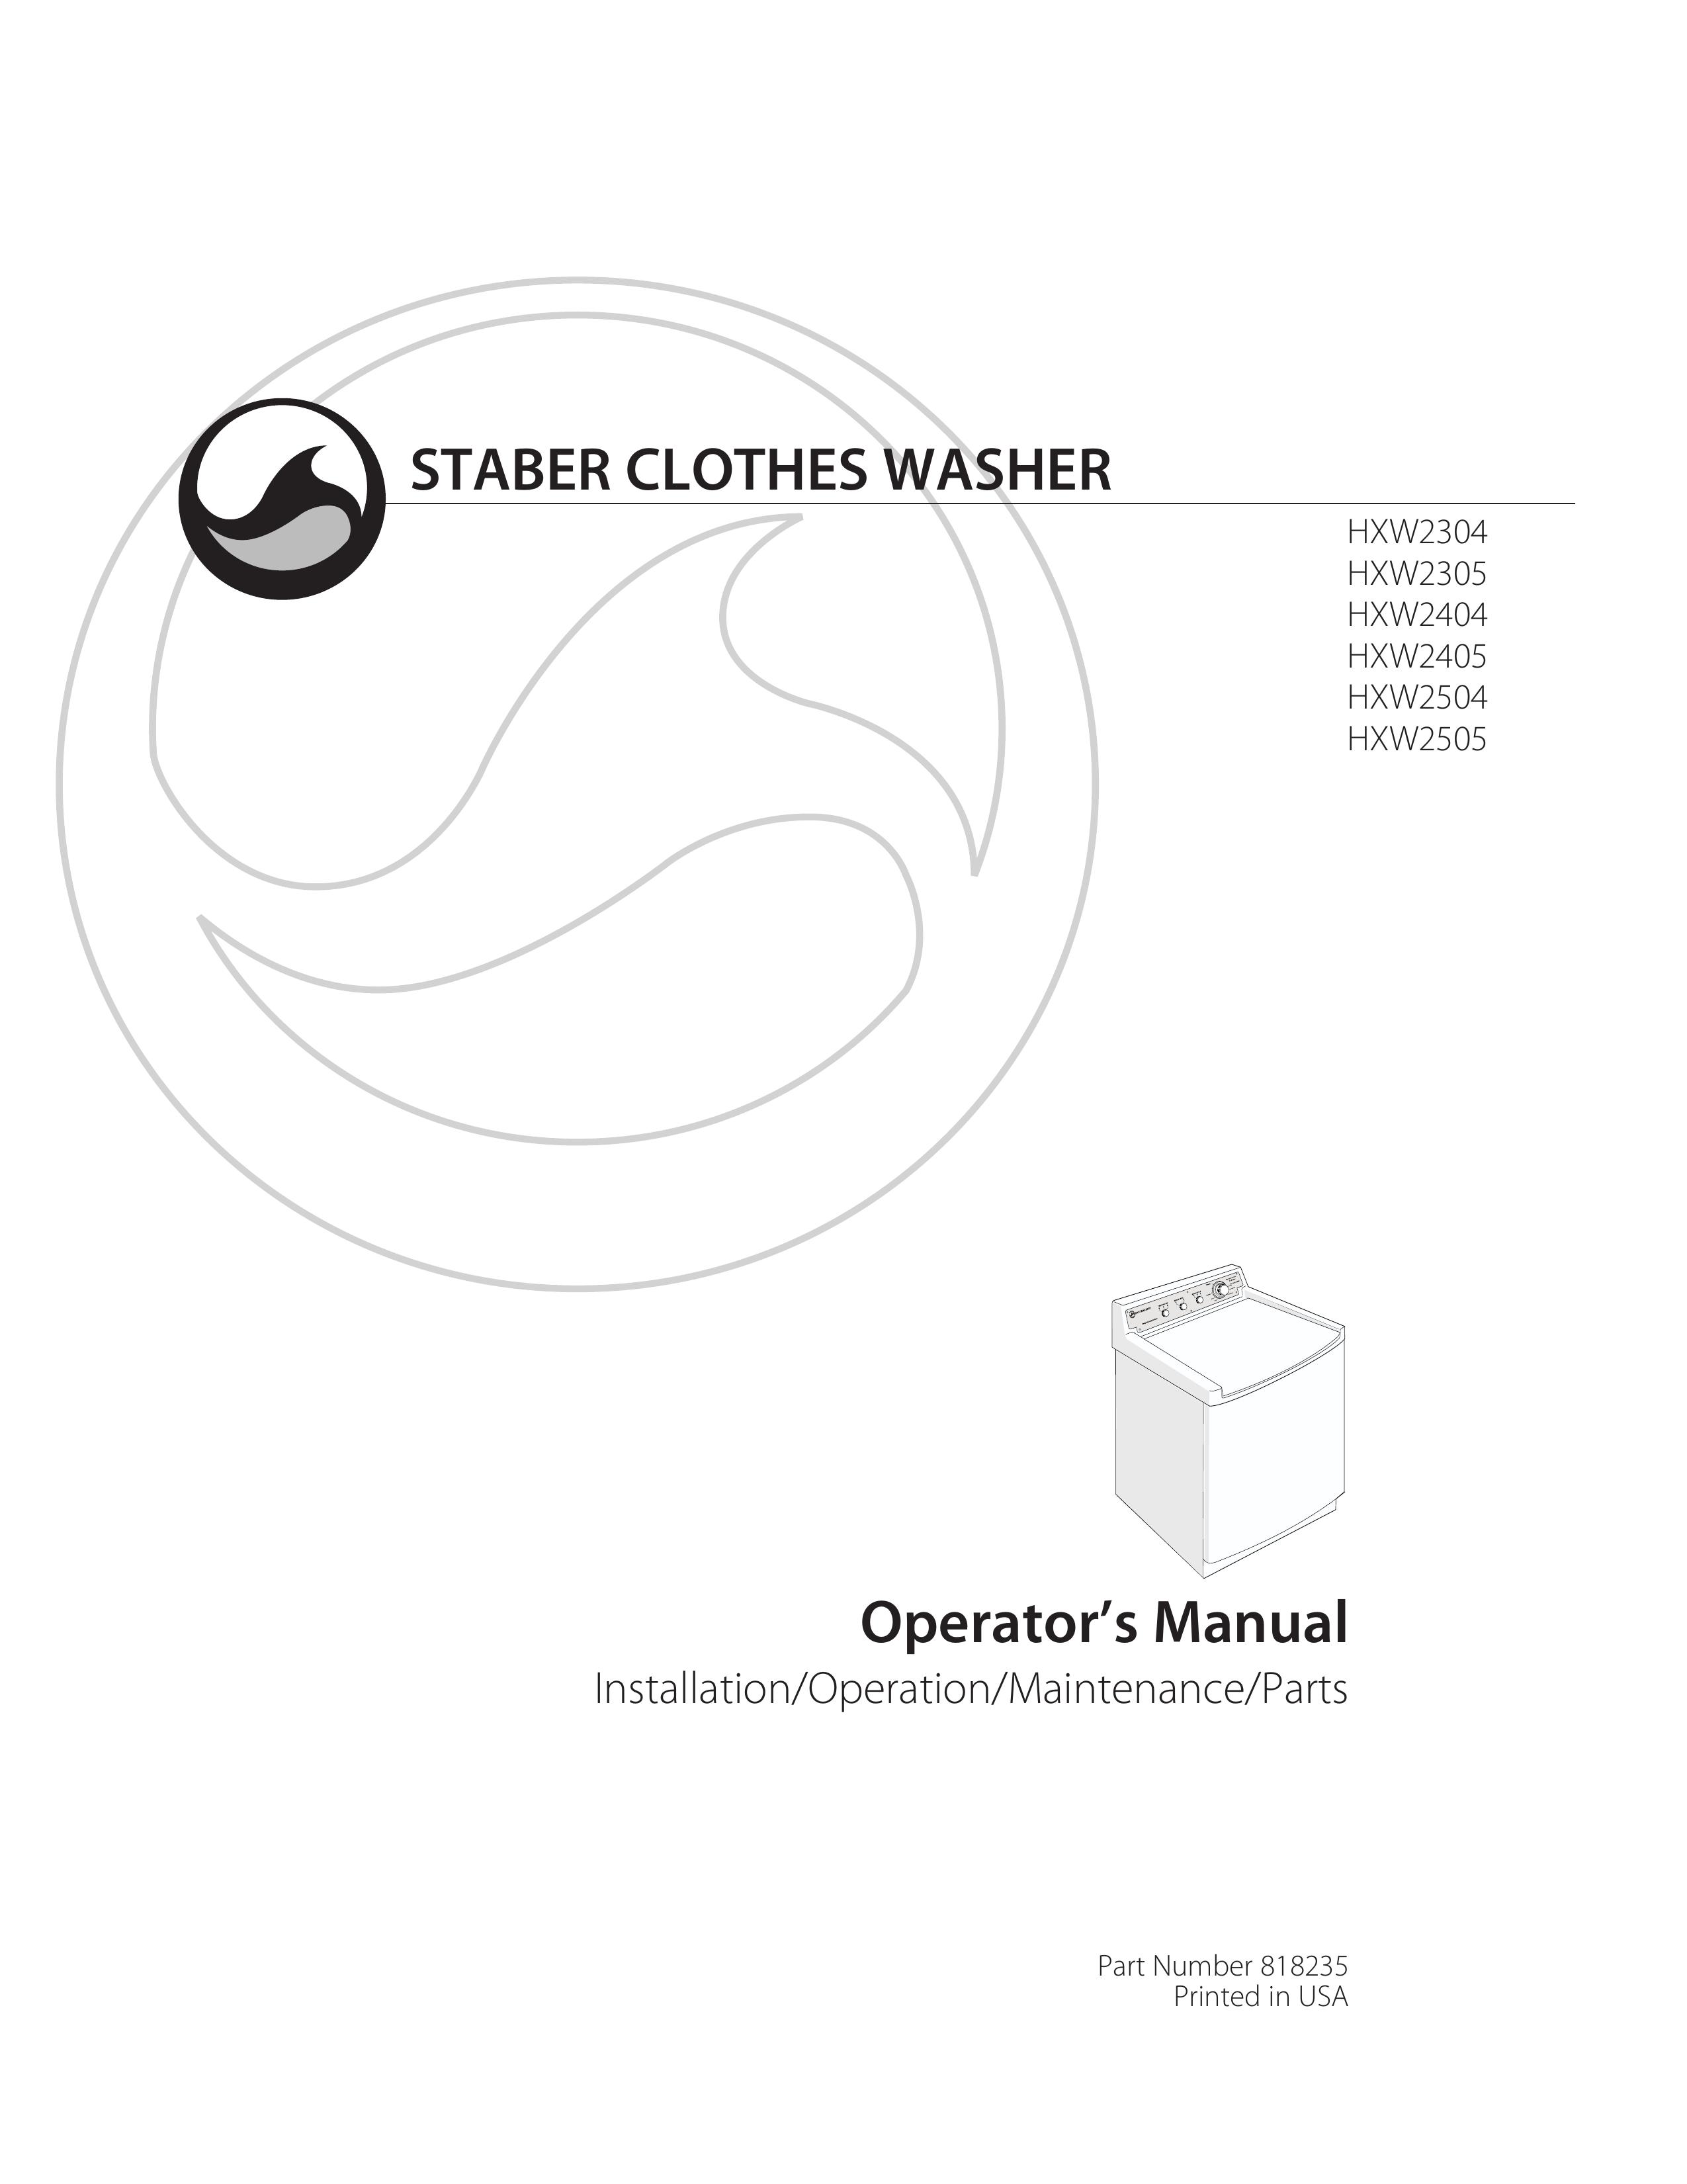 Staber Industries HXW2404 Washer User Manual